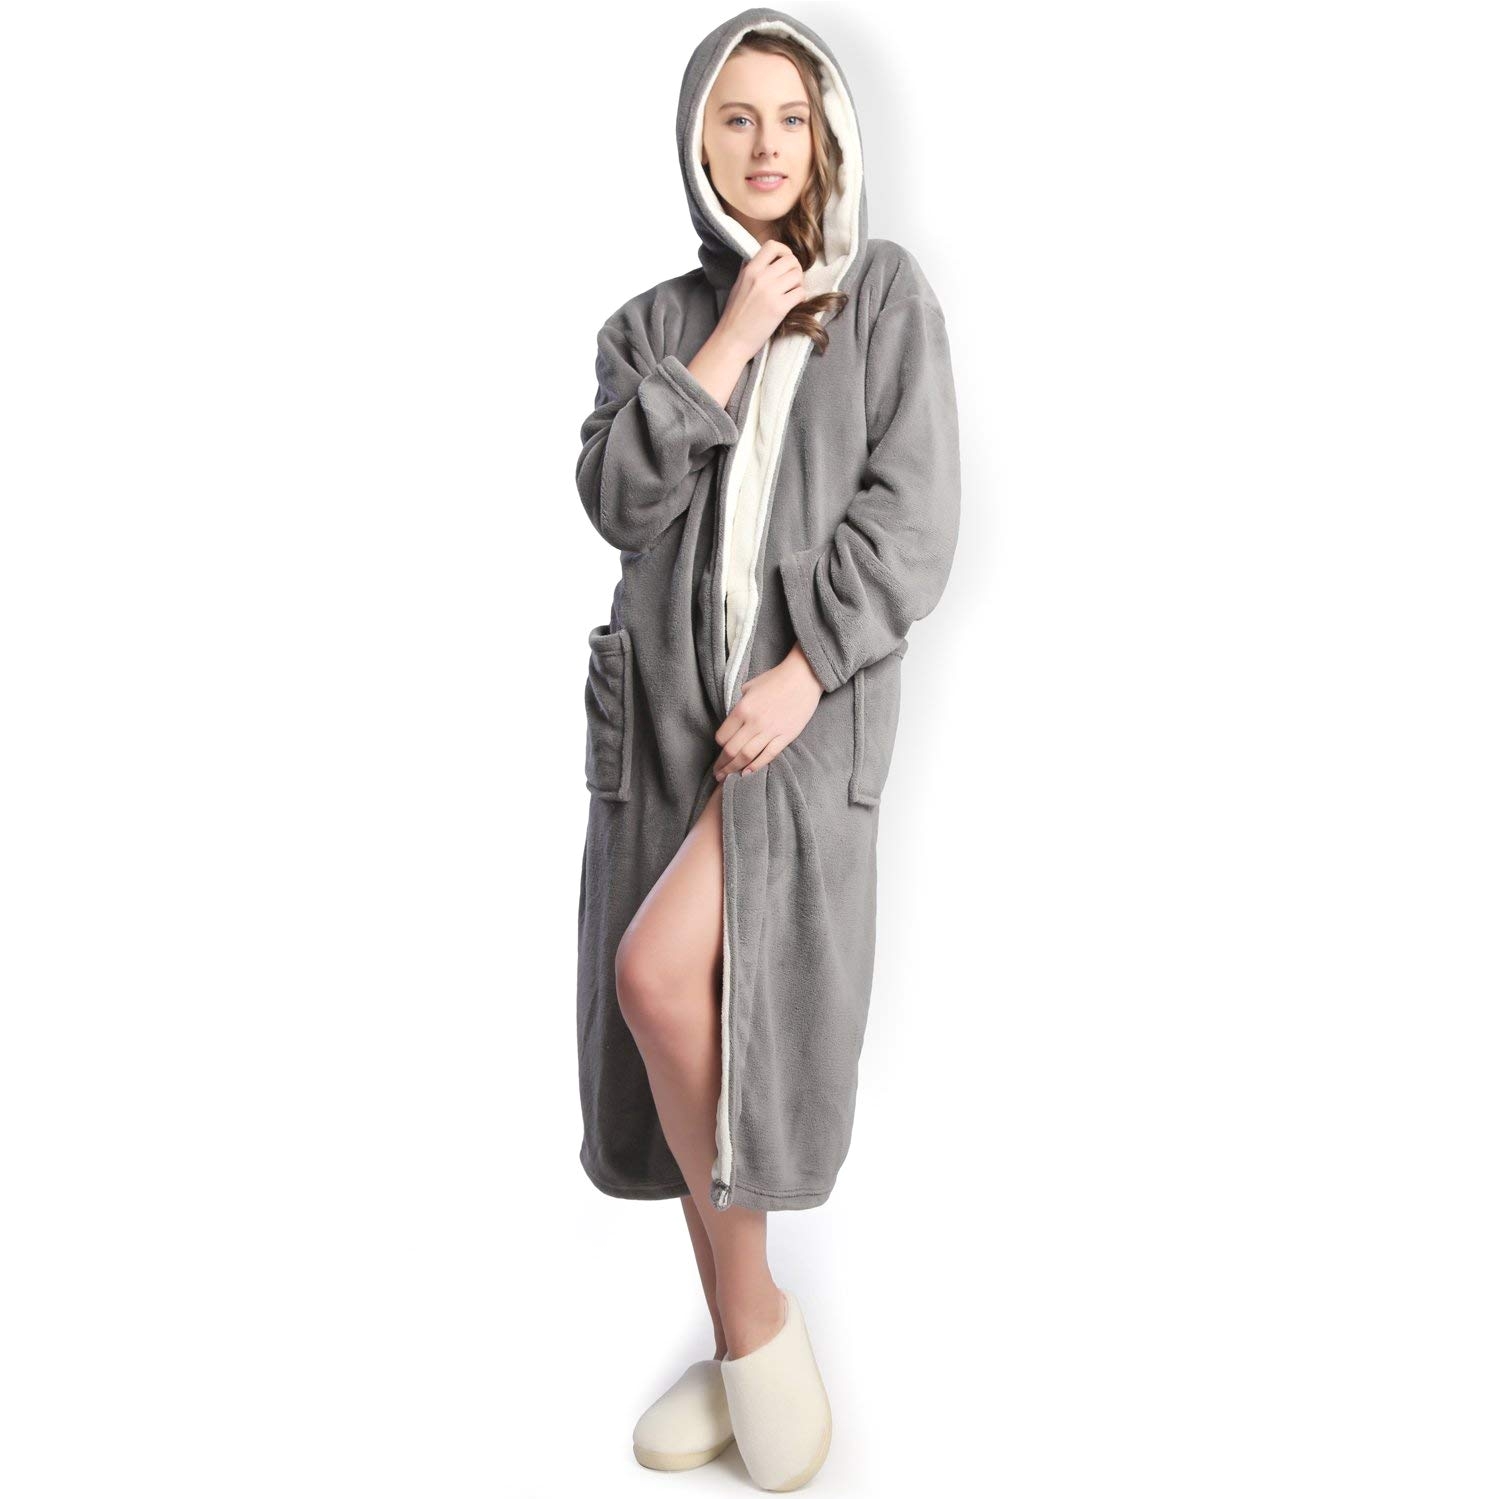 hooded herringbone women s grey color soft spa bathrobe with cream color shawl collar at amazon women s clothing store